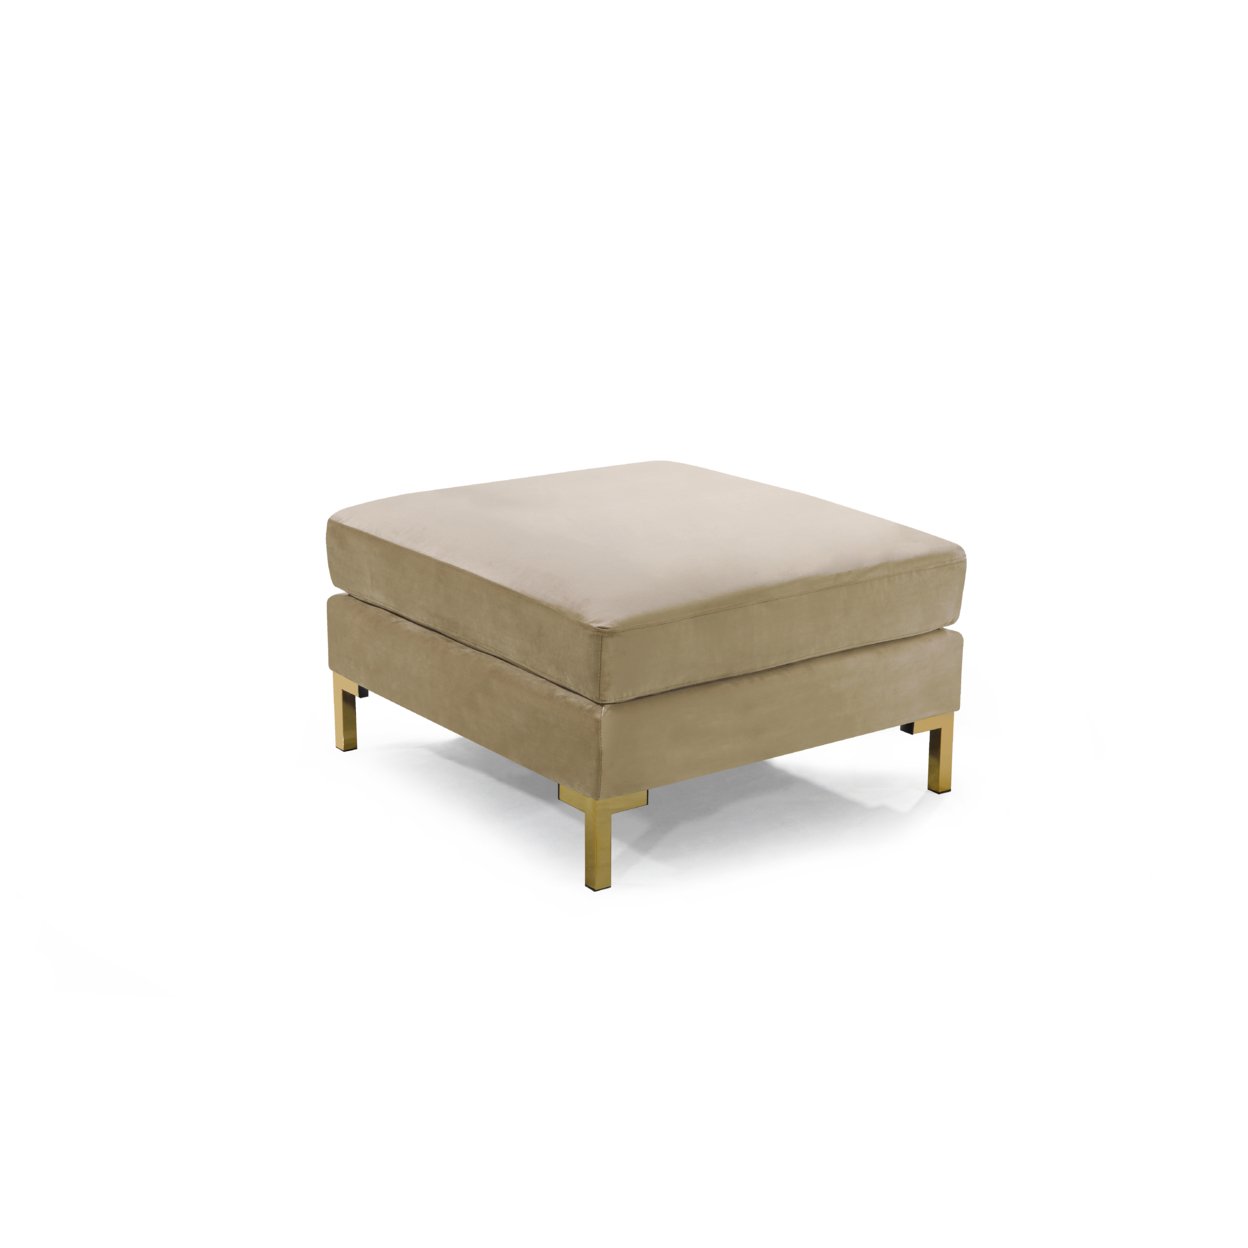 Greco Modular Chaise Ottoman Coffee Table Cushion Bench Solid Gold Tone Metal Y-Leg - Taupe